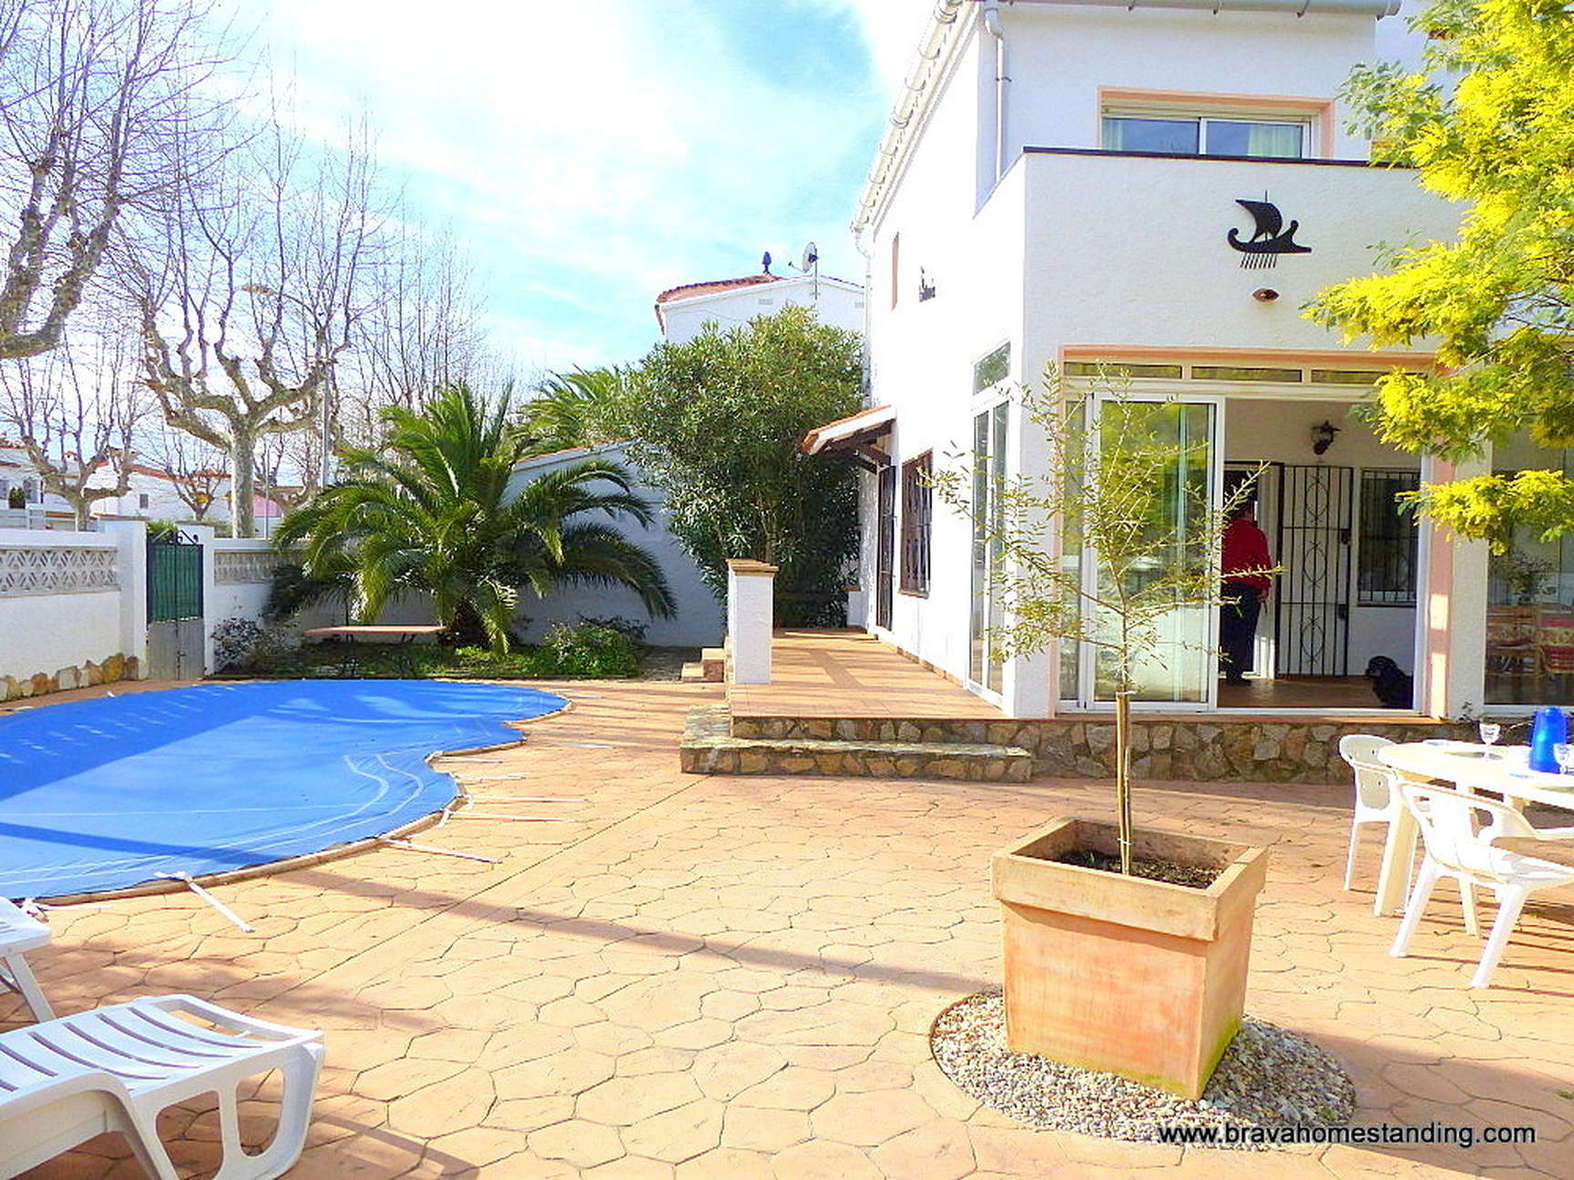 SUPERB VILLA WITH POOL FOR SALE IN EMPURIABRAVA